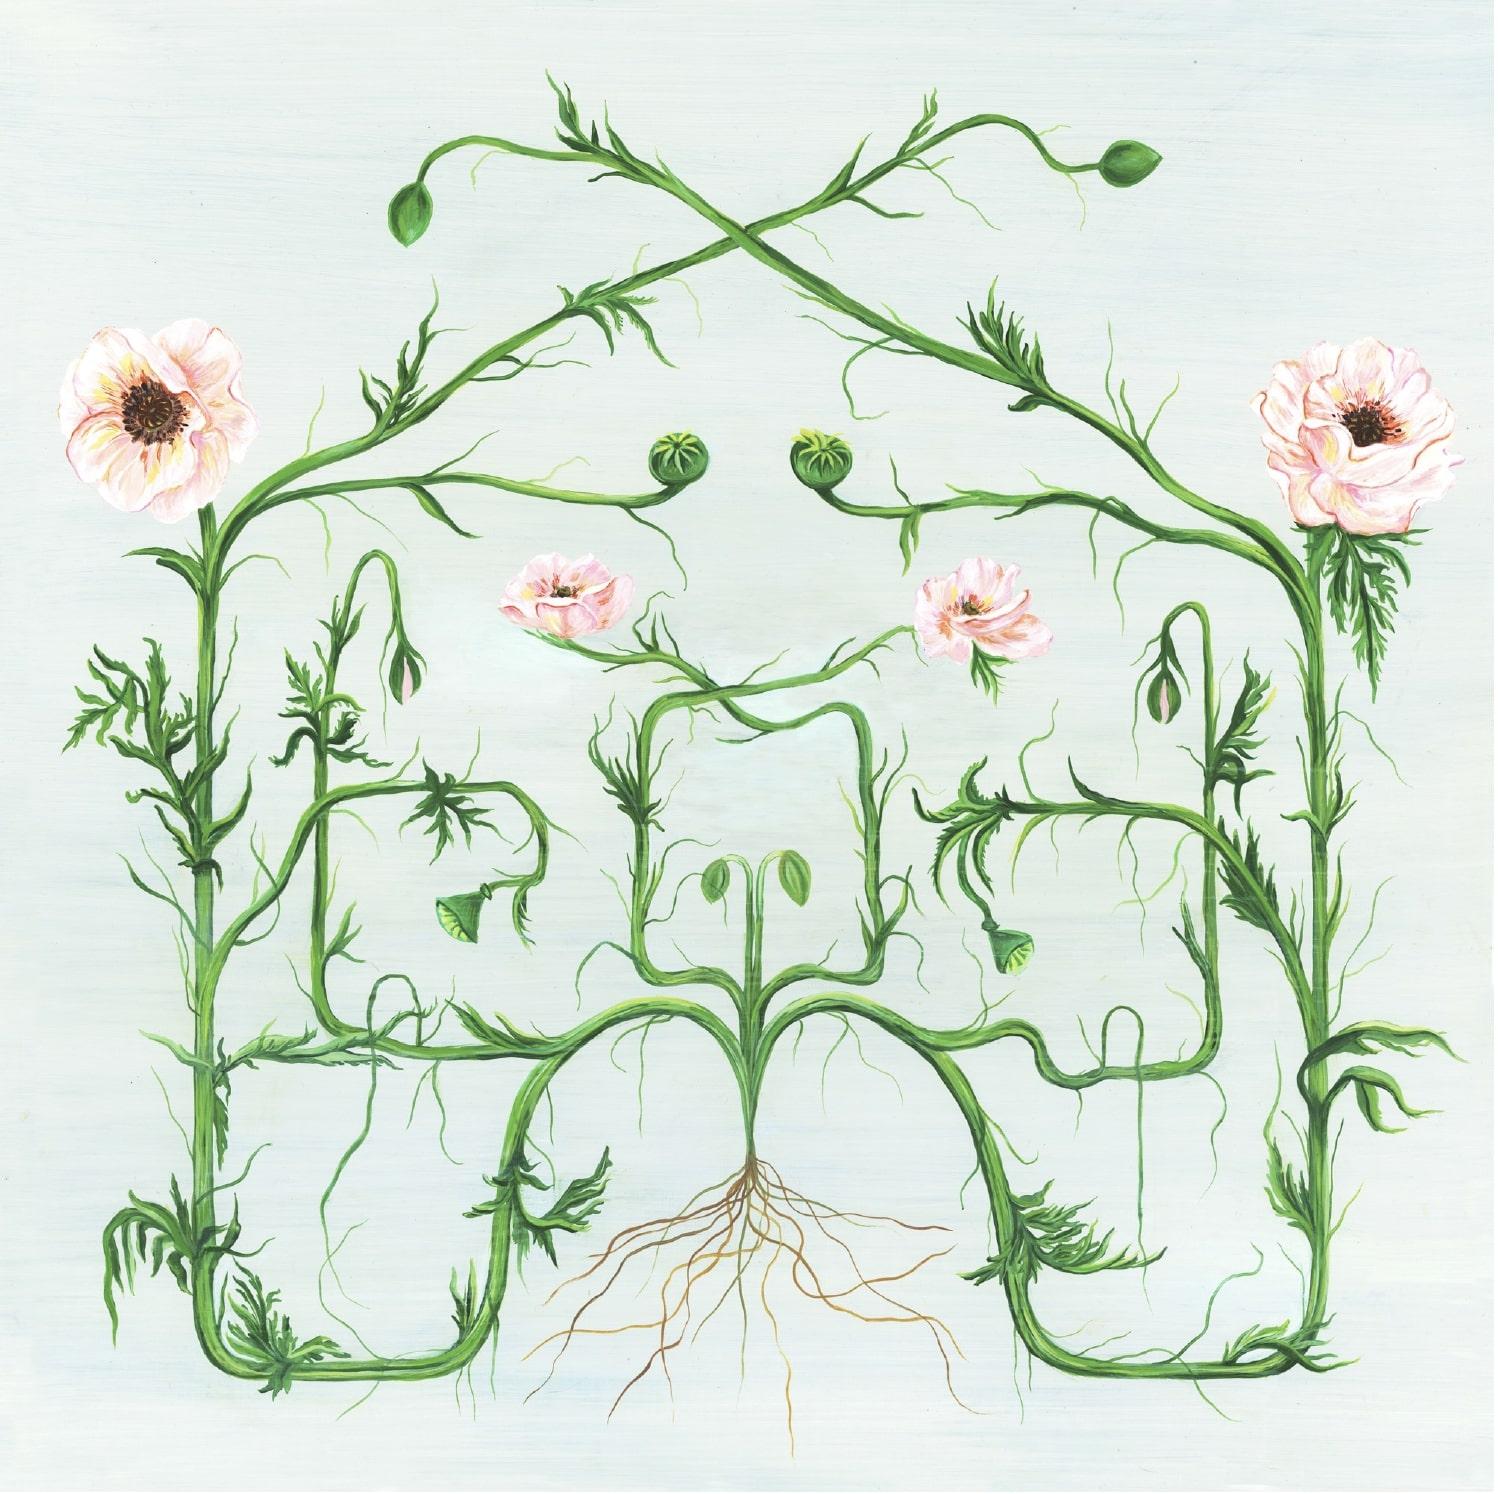 Rin Lack Abstract Print - House of Flowers- Symmetrical Square Floral Archival Print Edition on Paper  